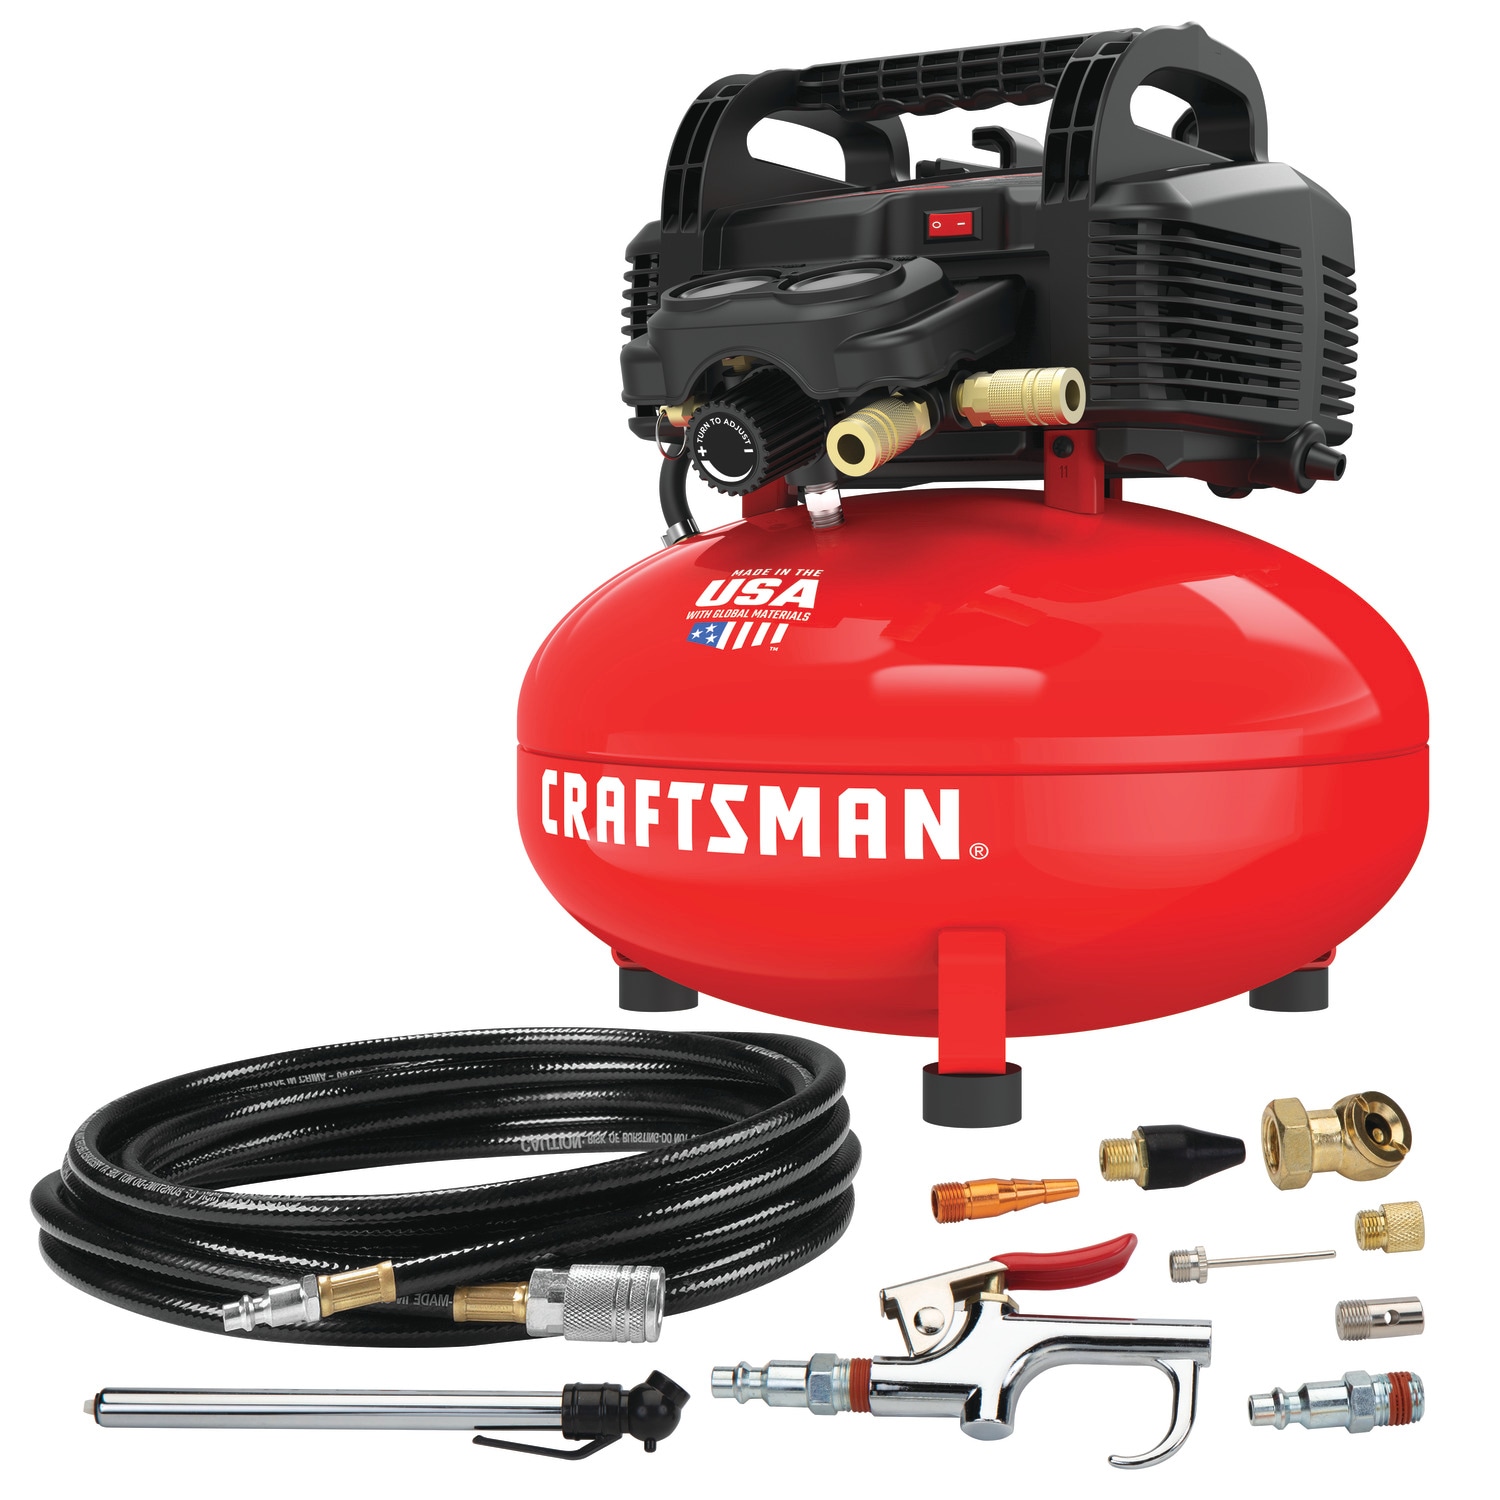 CRAFTSMAN 6-Gallons Single Stage Portable Corded Electric Pancake Air Compressor with Accessories